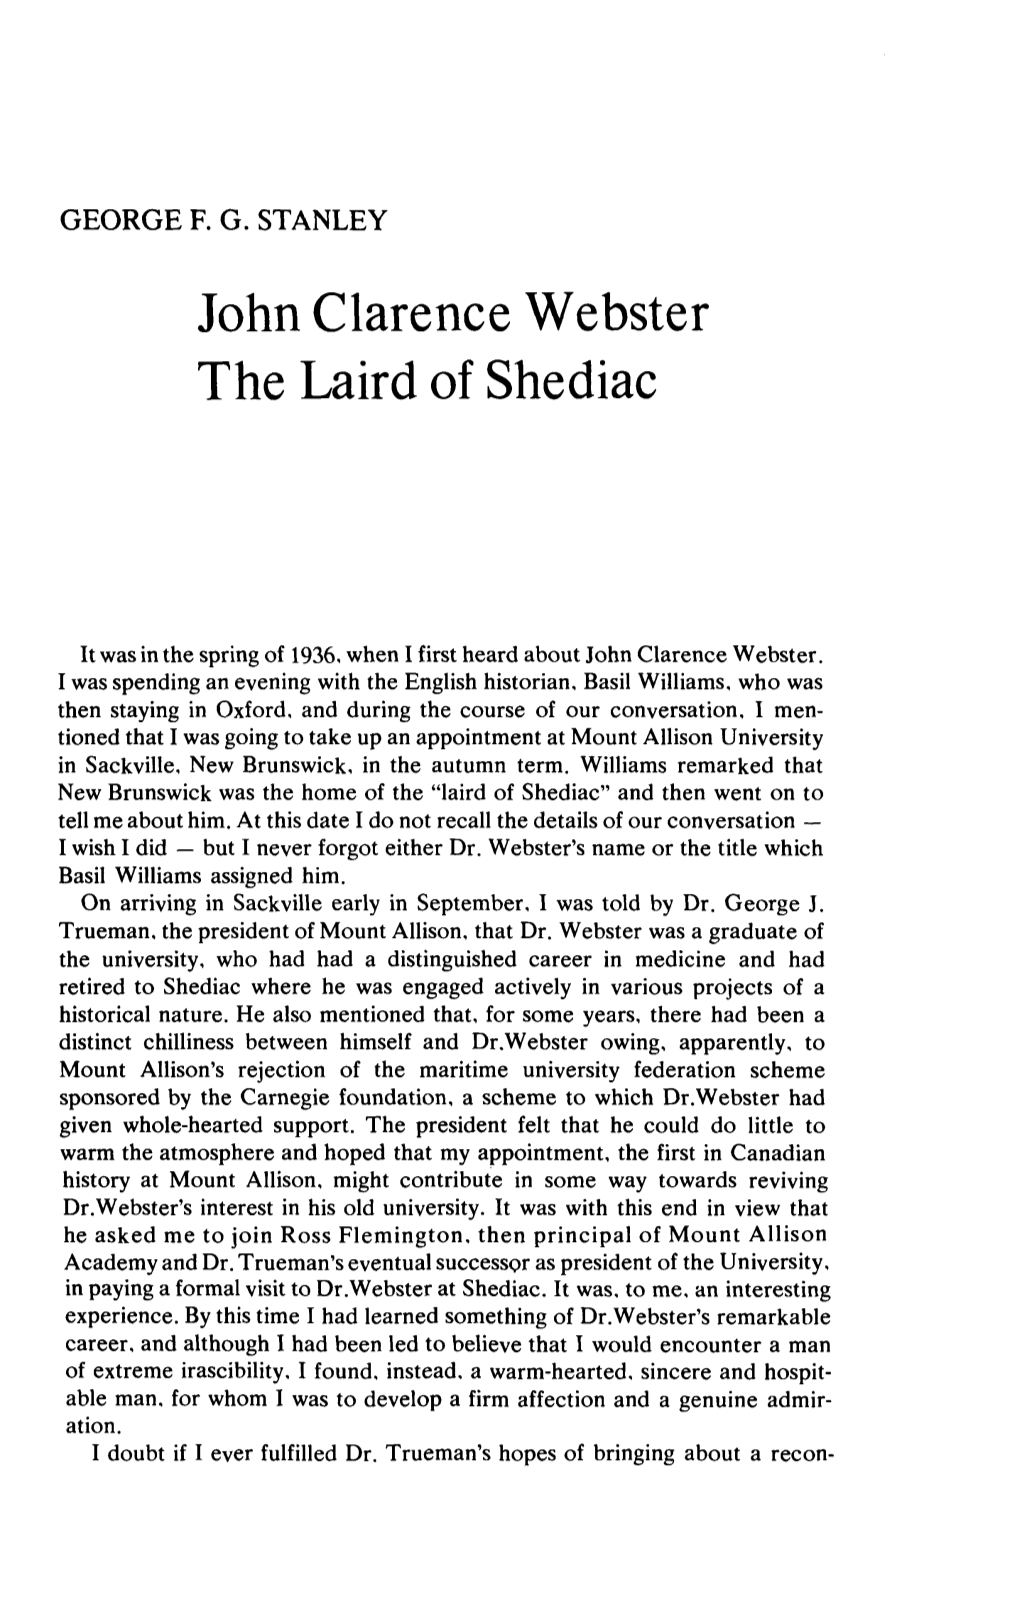 John Clarence Webster the Laird of Shediac